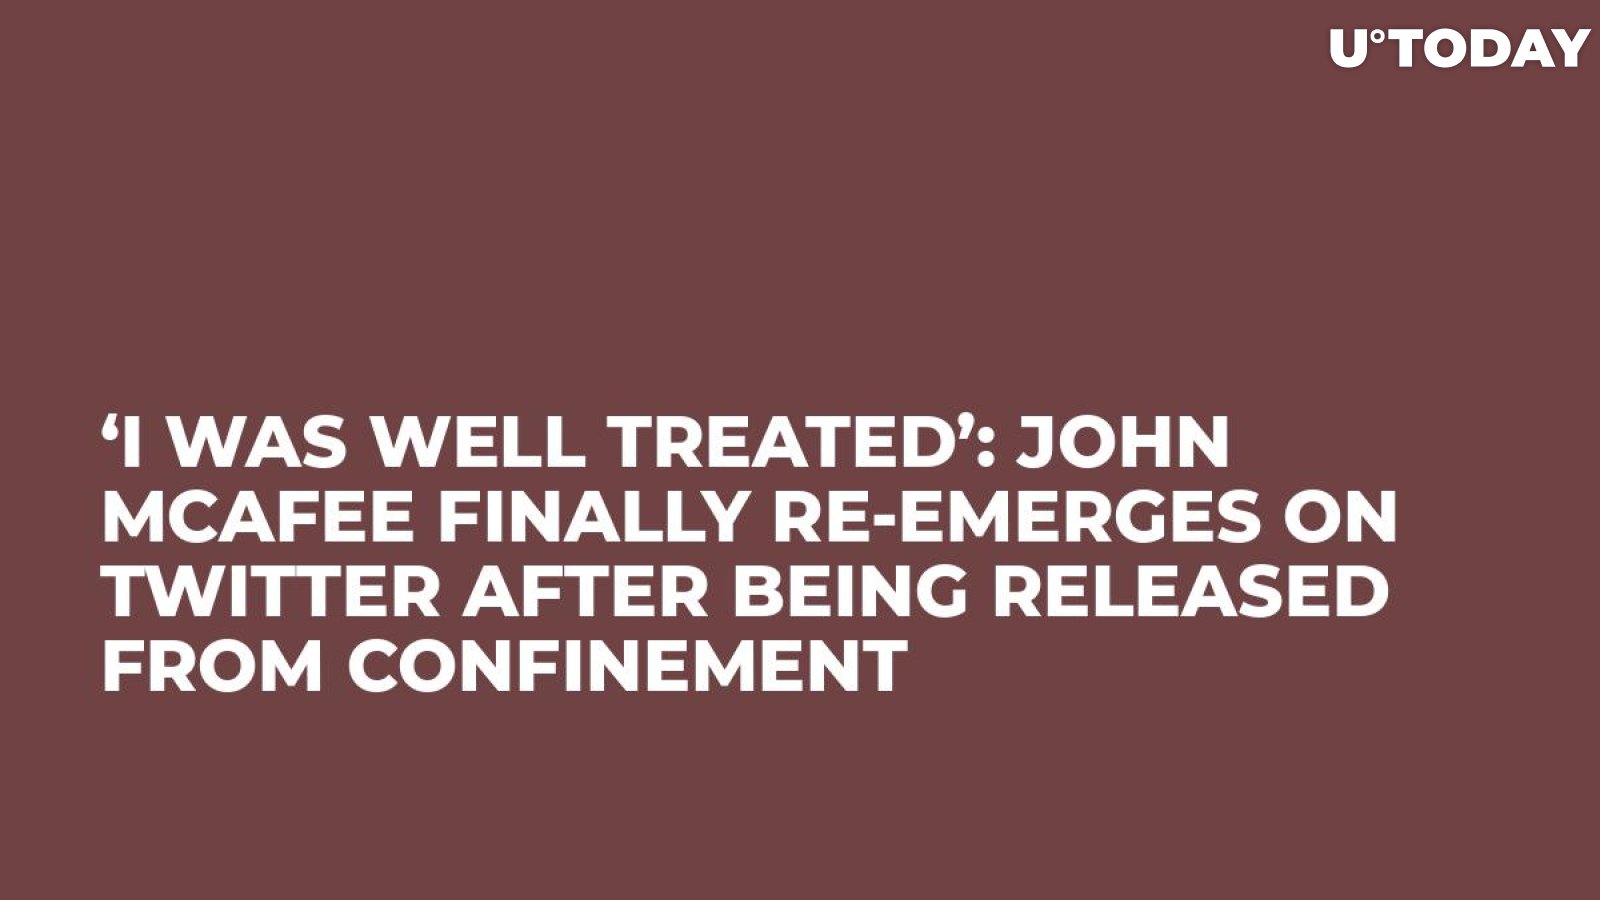 ‘I Was Well Treated’: John McAfee Finally Re-Emerges on Twitter After Being Released from Confinement